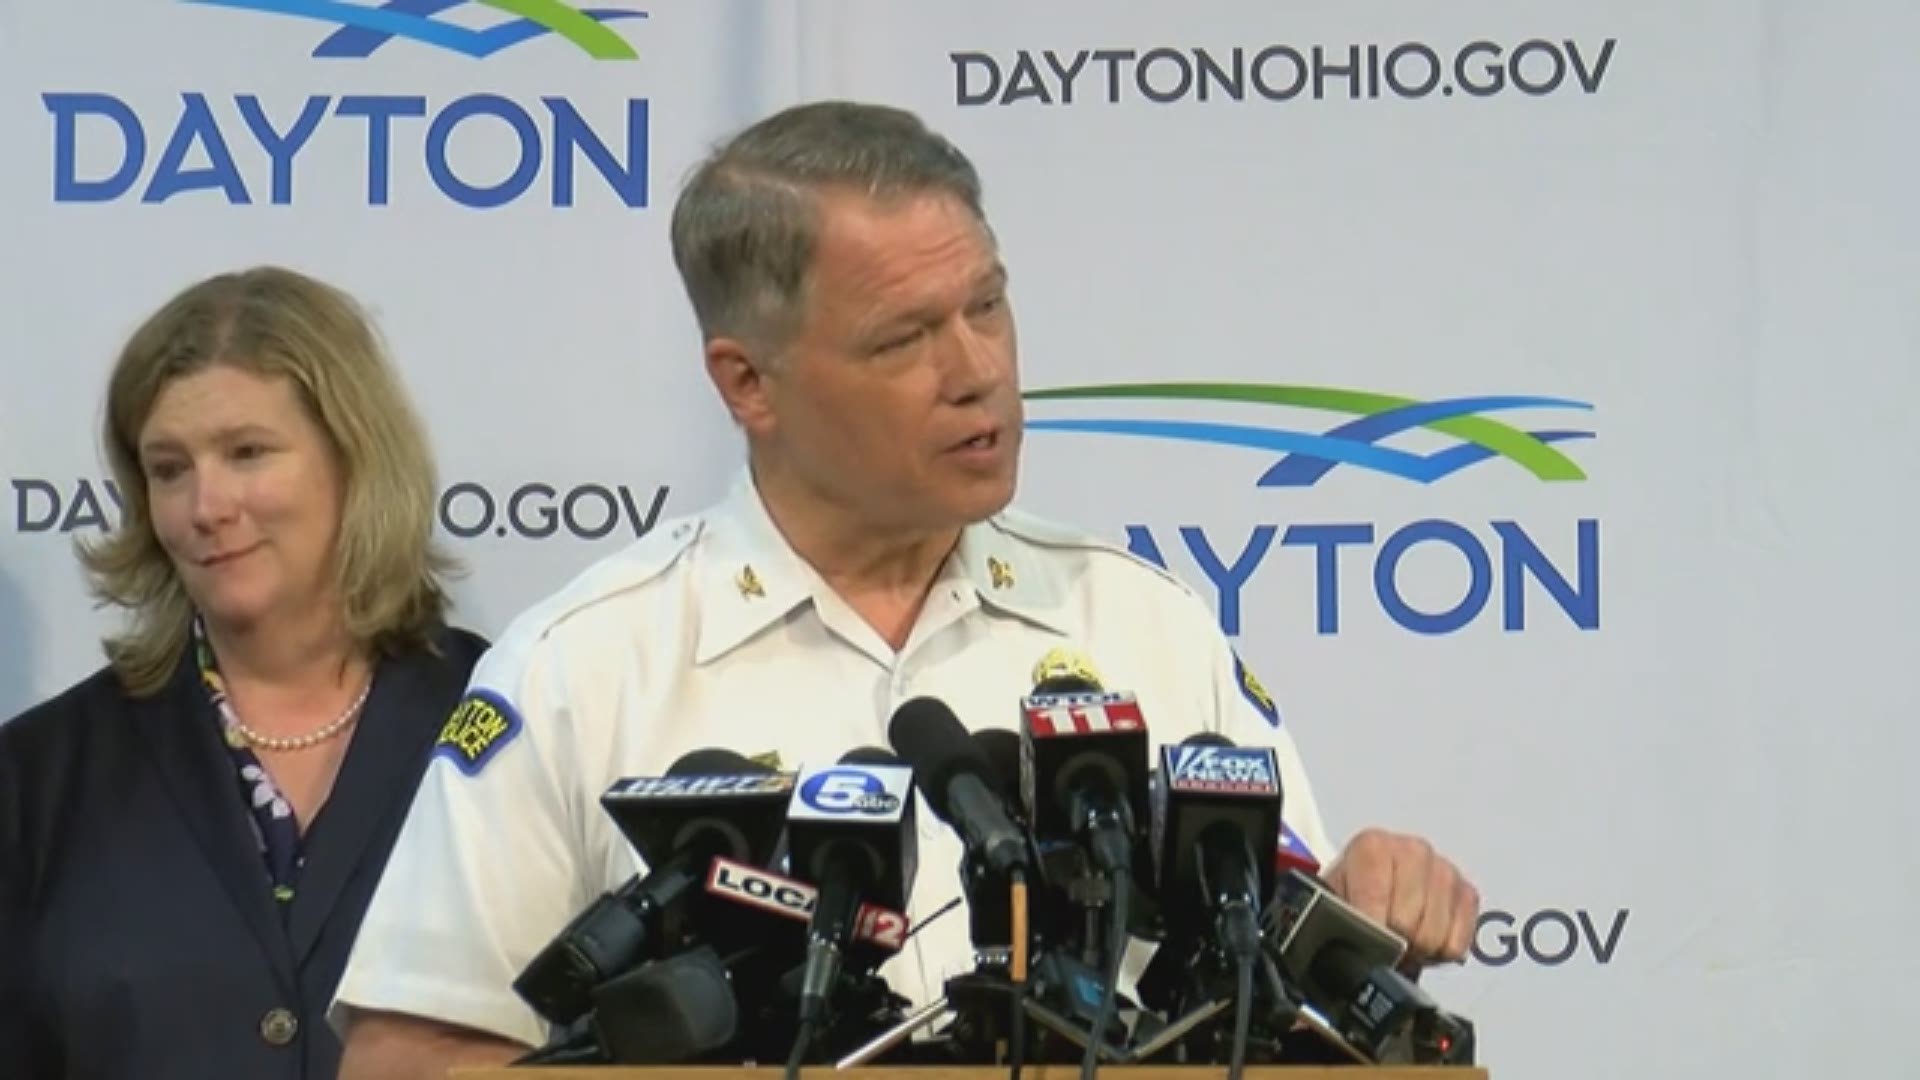 Dayton Police Chief Richard Biehl says officers neutralized shooter within 30 seconds of firing first shots.